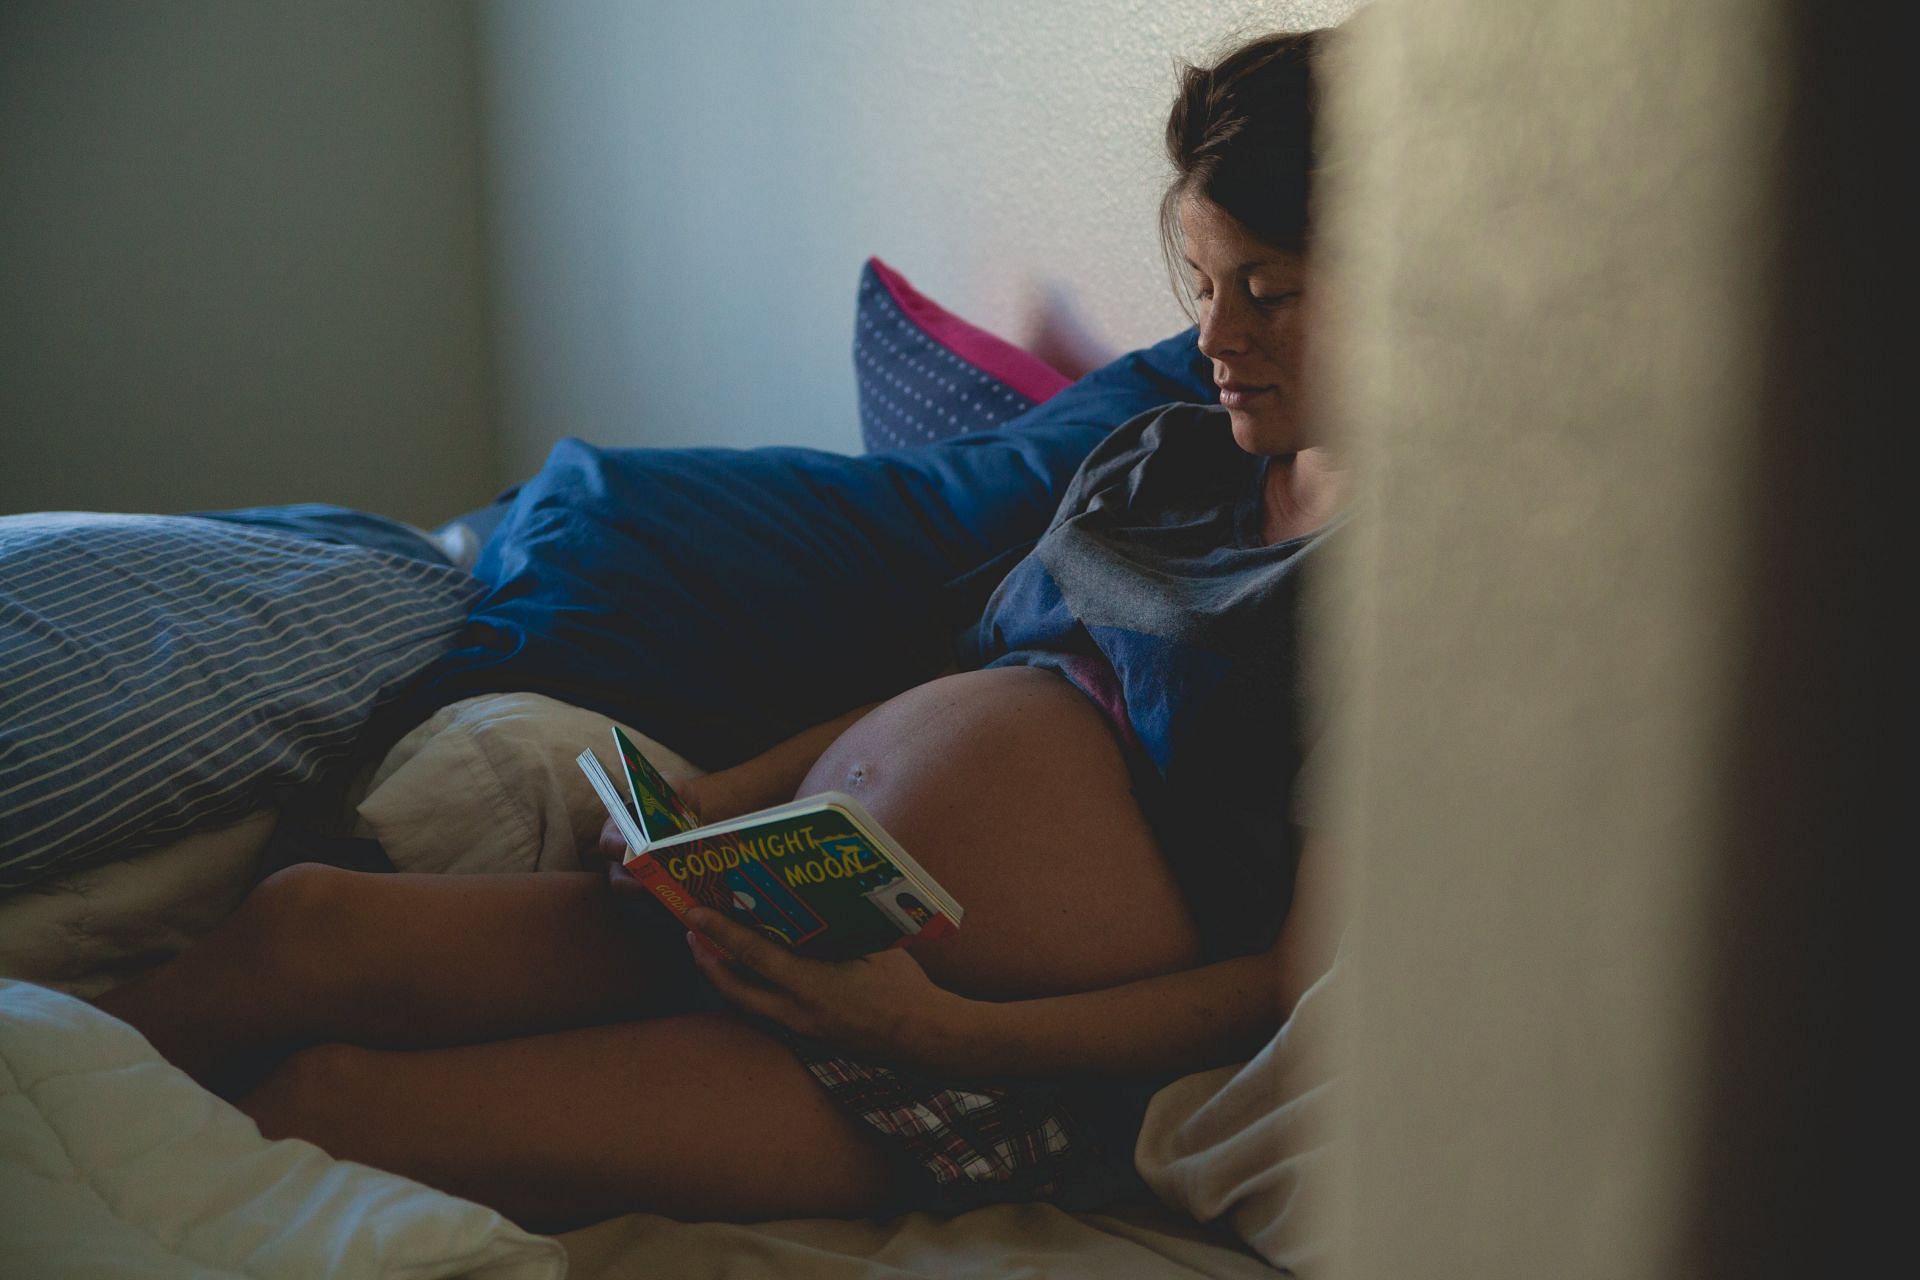 overweight and pregnant (image sourced via Pexels / Photo by josh)